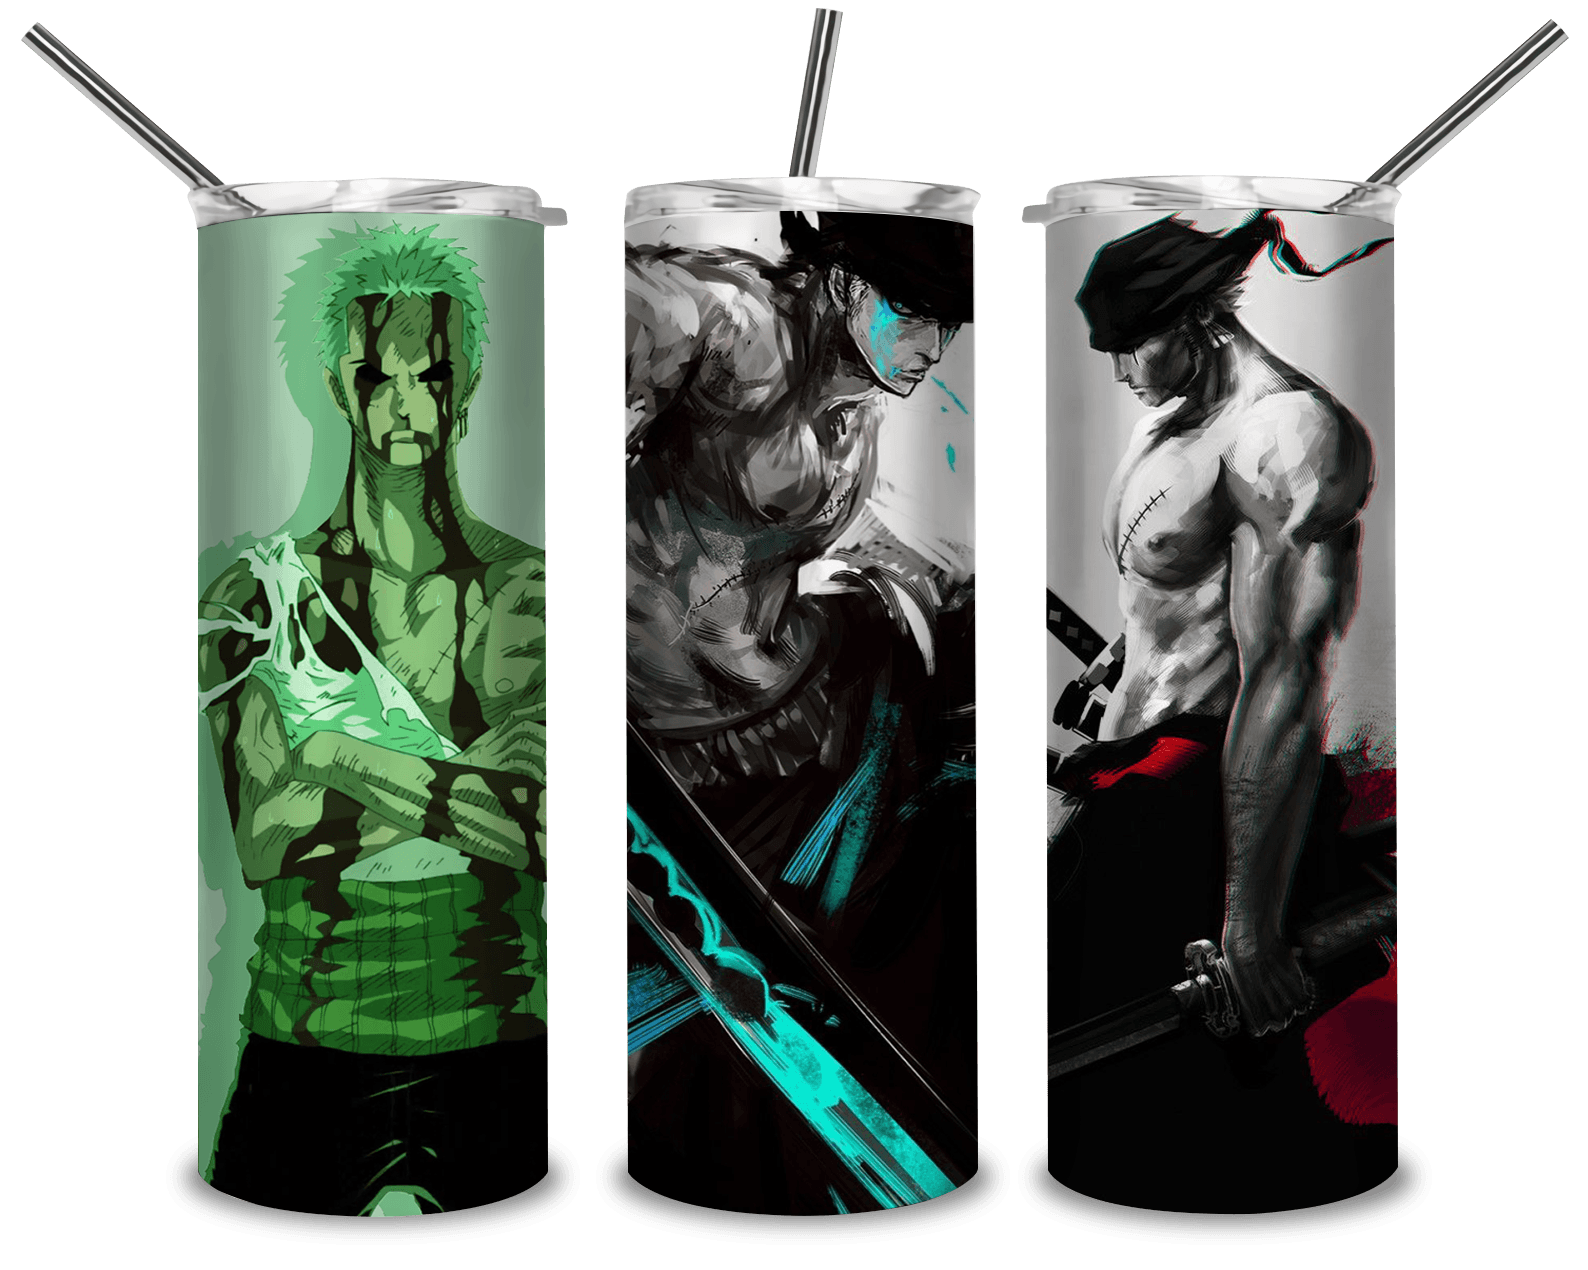 One Piece Zoro PNG, Zoro Manga 20oz Skinny Tumbler Designs PNG, Sublimation Designs PNG - TheDigitalSVG